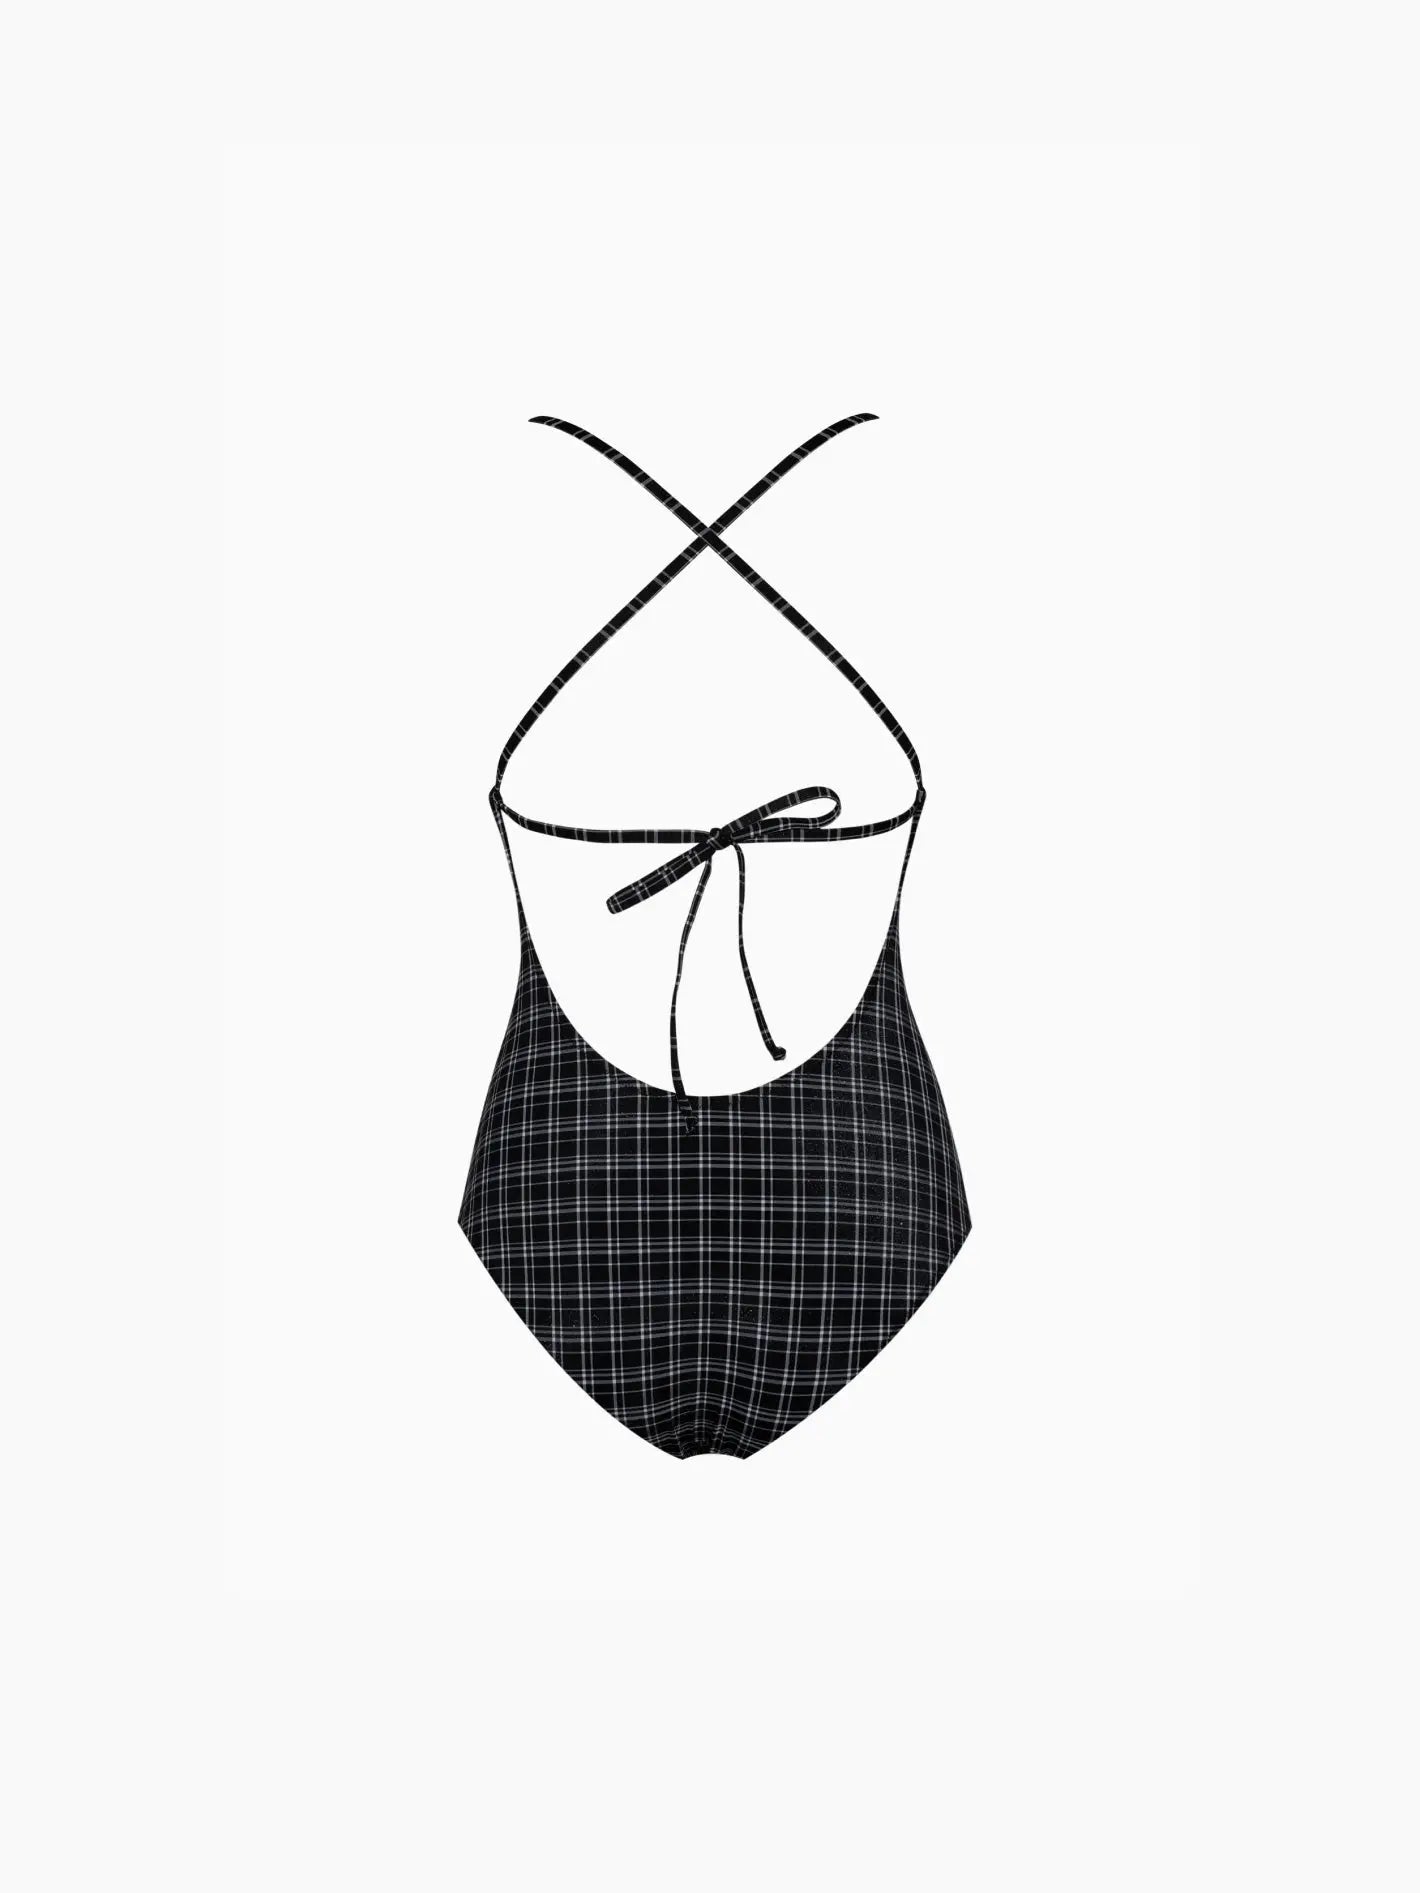 A Birkin Swimwear B&W one-piece swimsuit by Pale with a white plaid pattern, perfect for any beach day in Barcelona. The swimsuit has thin shoulder straps and a square neckline. The fabric appears slightly ruched and form-fitting, ensuring elegance and comfort. Shop this look at bassalstore on a plain white background.